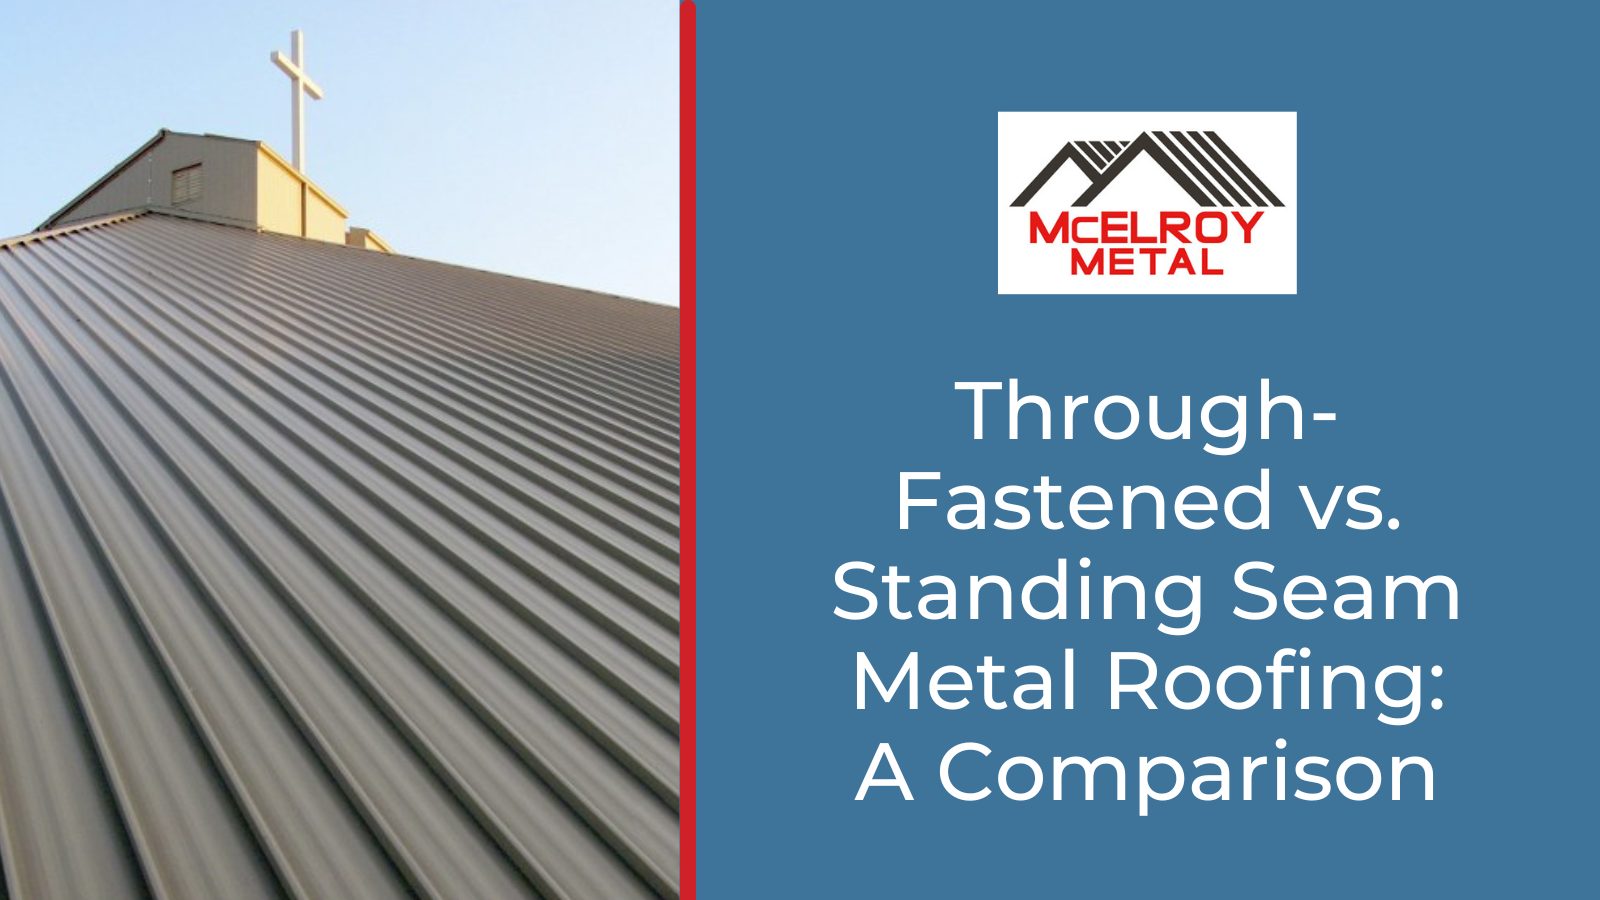 Through-Fastened vs. Standing Seam Metal Roofing: A Comparison